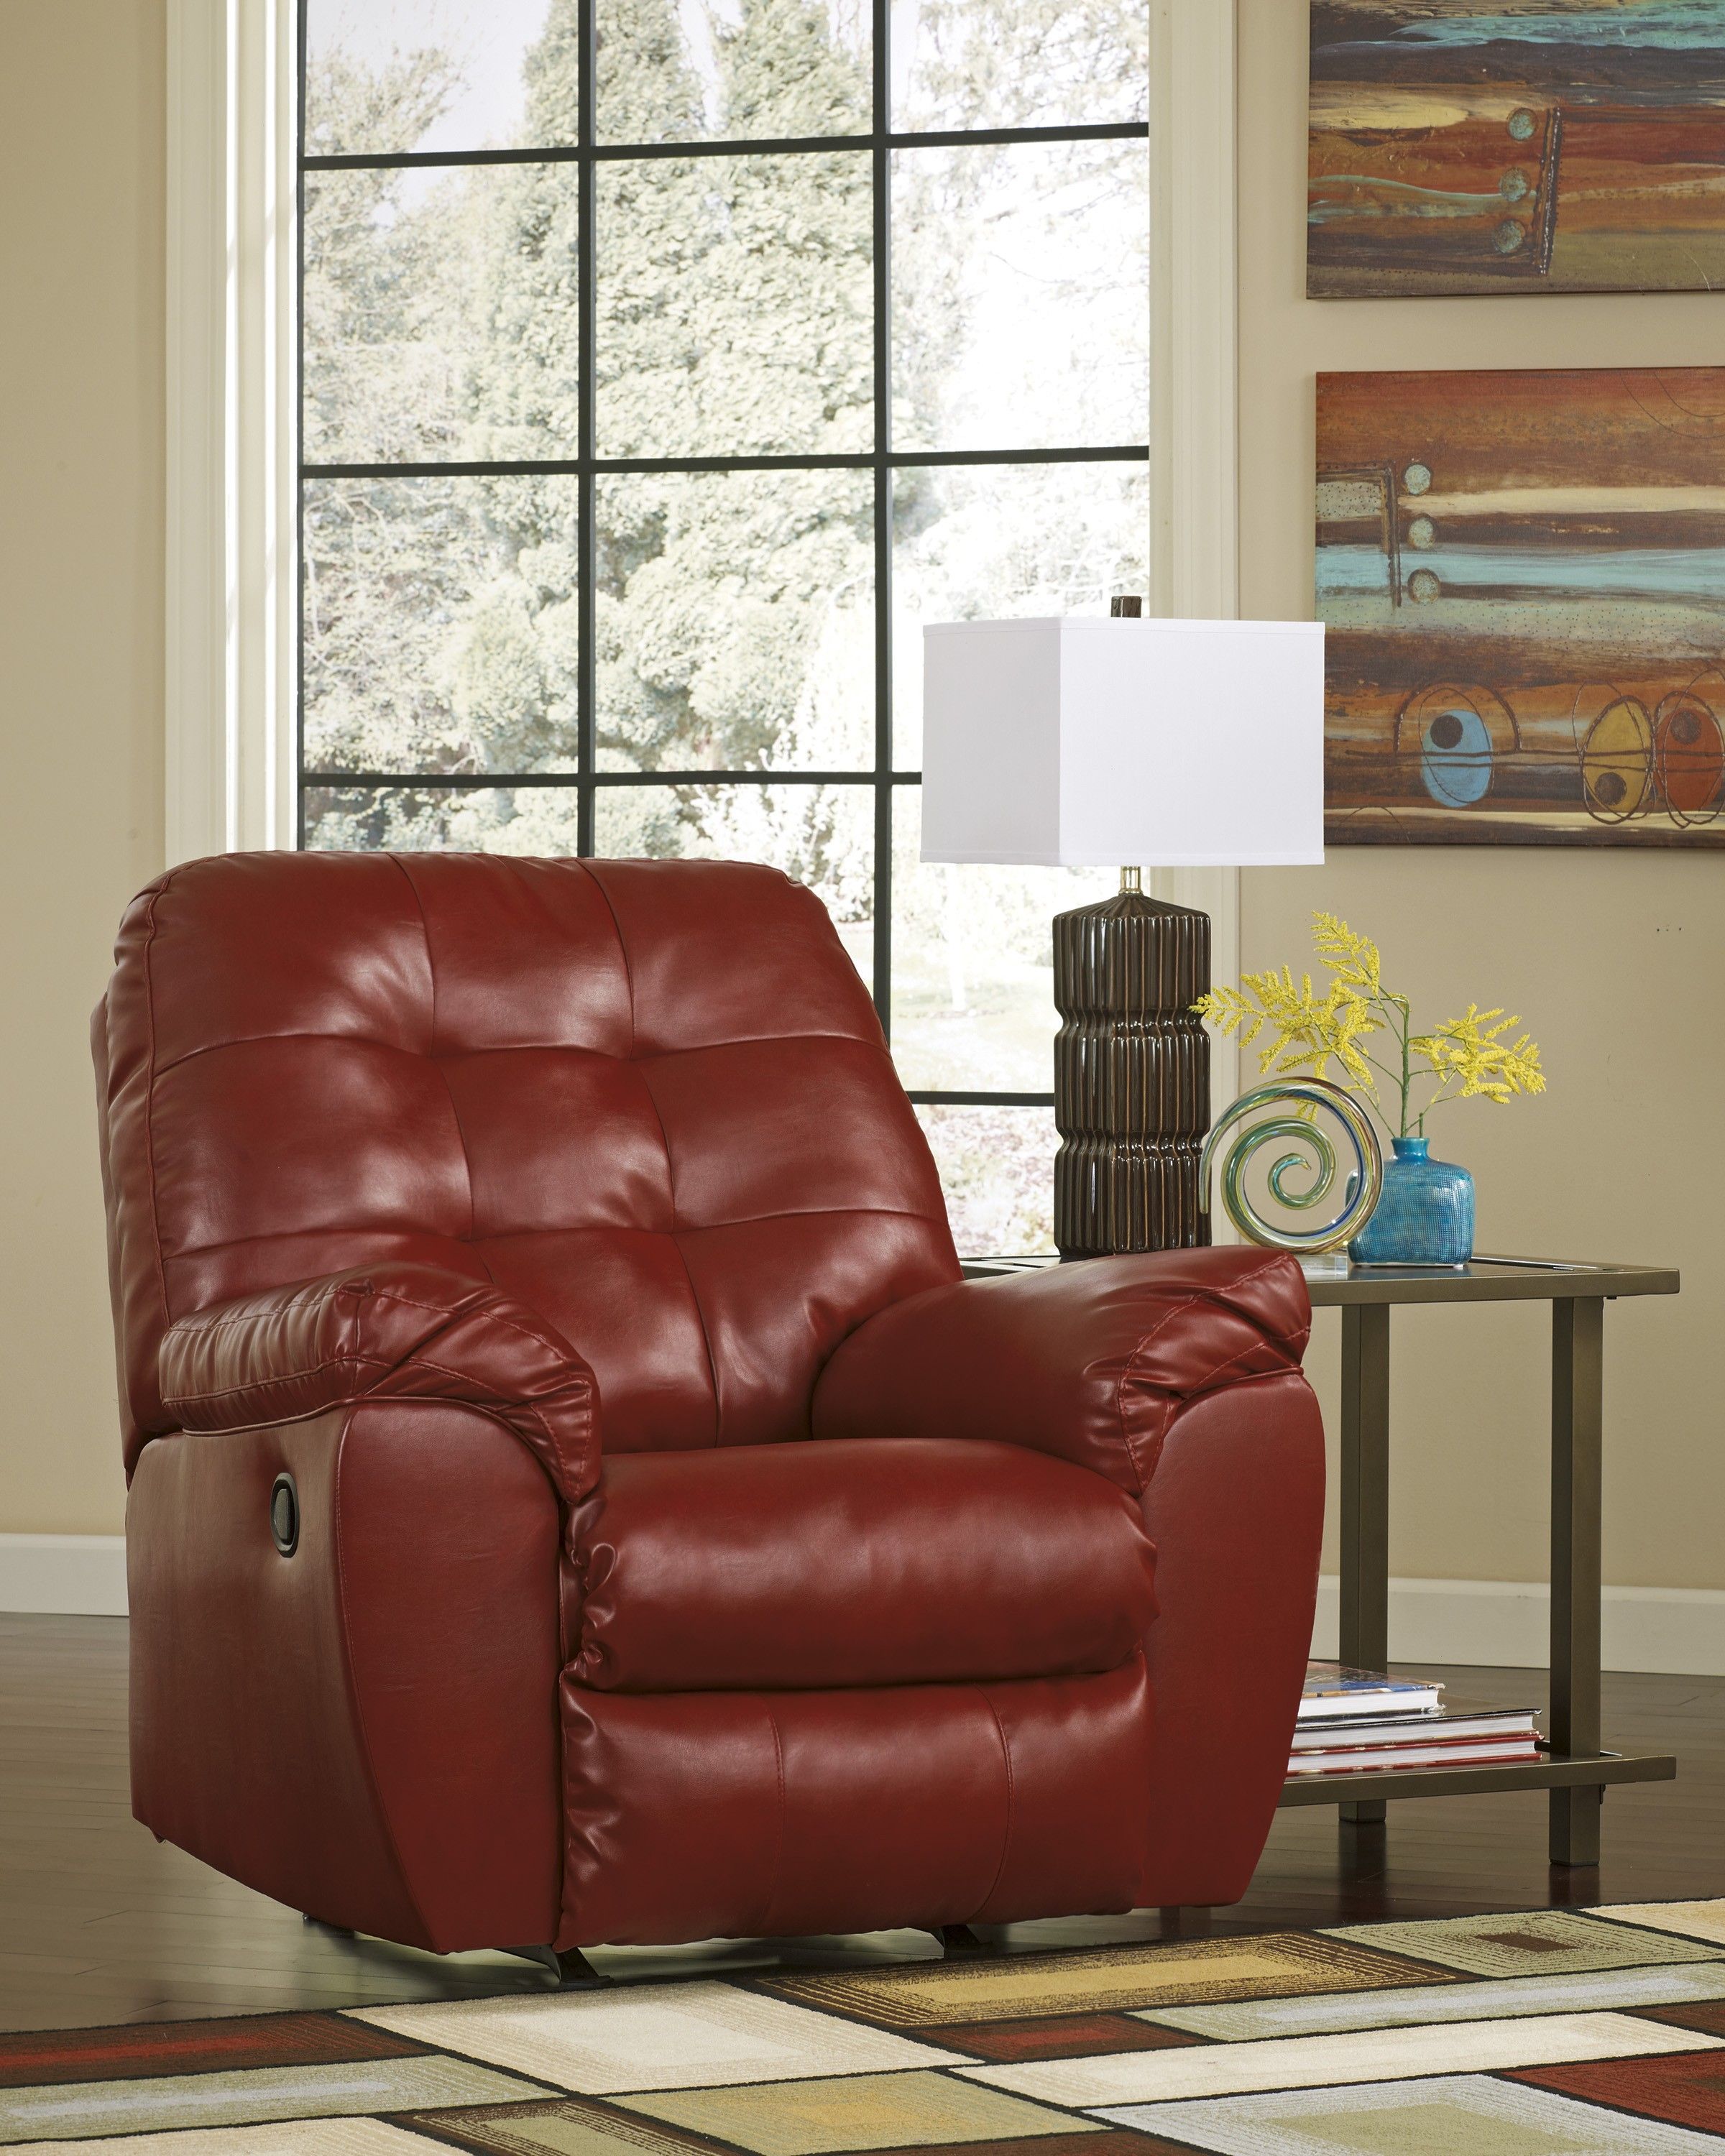 Leon Furniture | Buy Living Rooms Recliners Online, Phoenix For Hercules Oyster Swivel Glider Recliners (Photo 13 of 25)